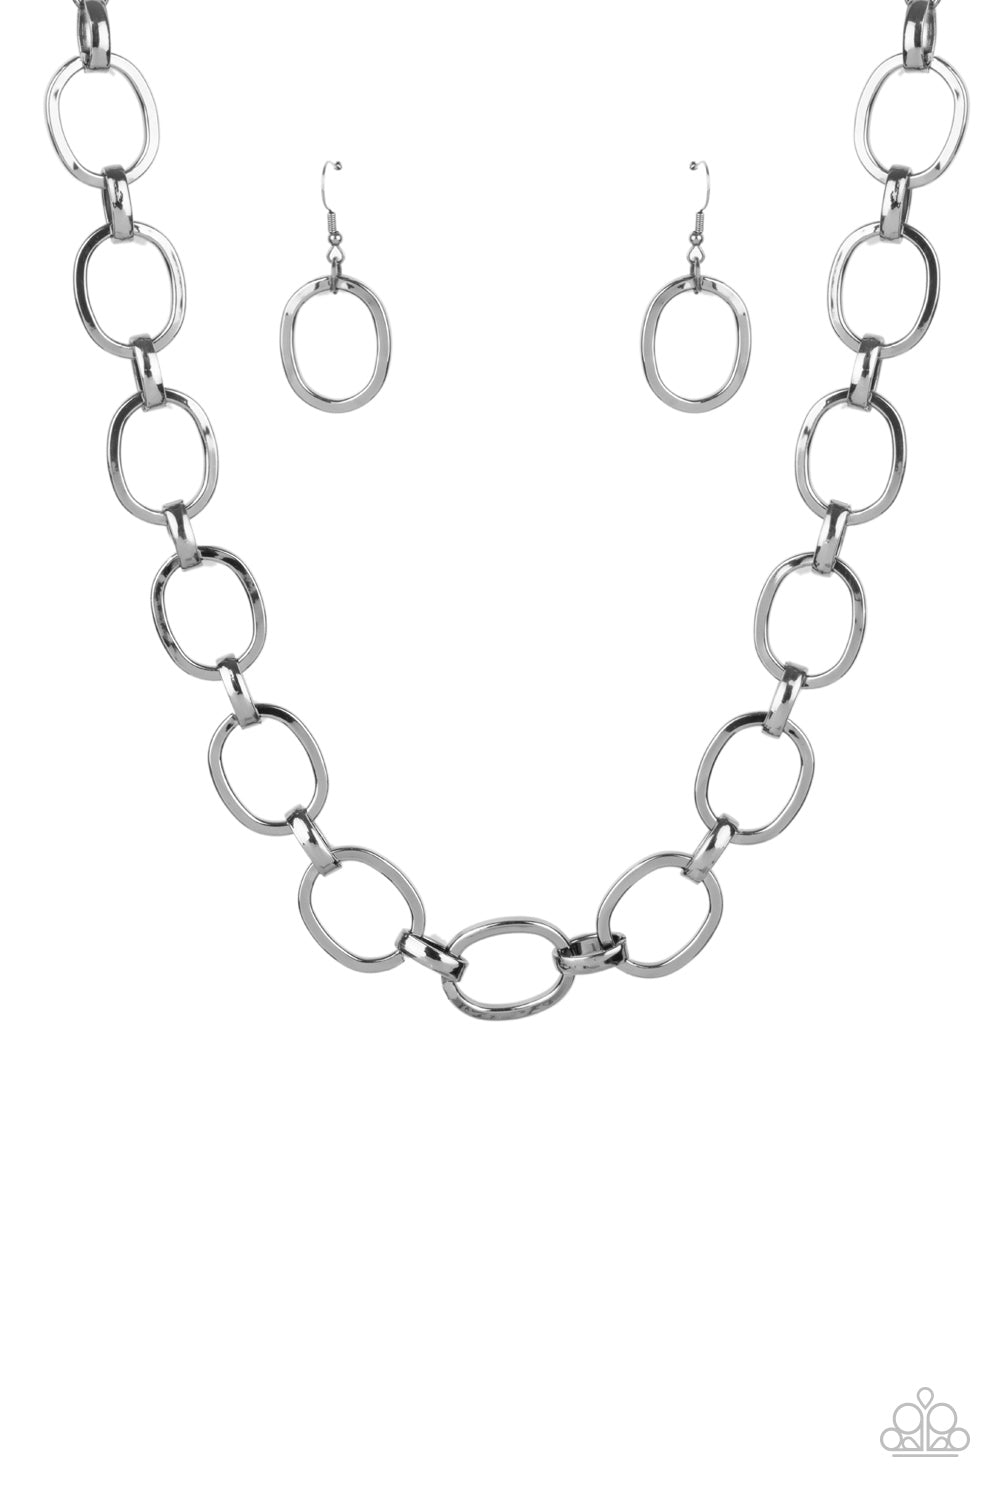 HAUTE-ly Contested Black Necklace - Paparazzi Accessories  A glistening series of dramatically oversized ovals and links boldly connect below the collar, creating an intense industrial statement. Features an adjustable clasp closure.  All Paparazzi Accessories are lead free and nickel free!   Sold as one individual necklace. Includes one pair of matching earrings.